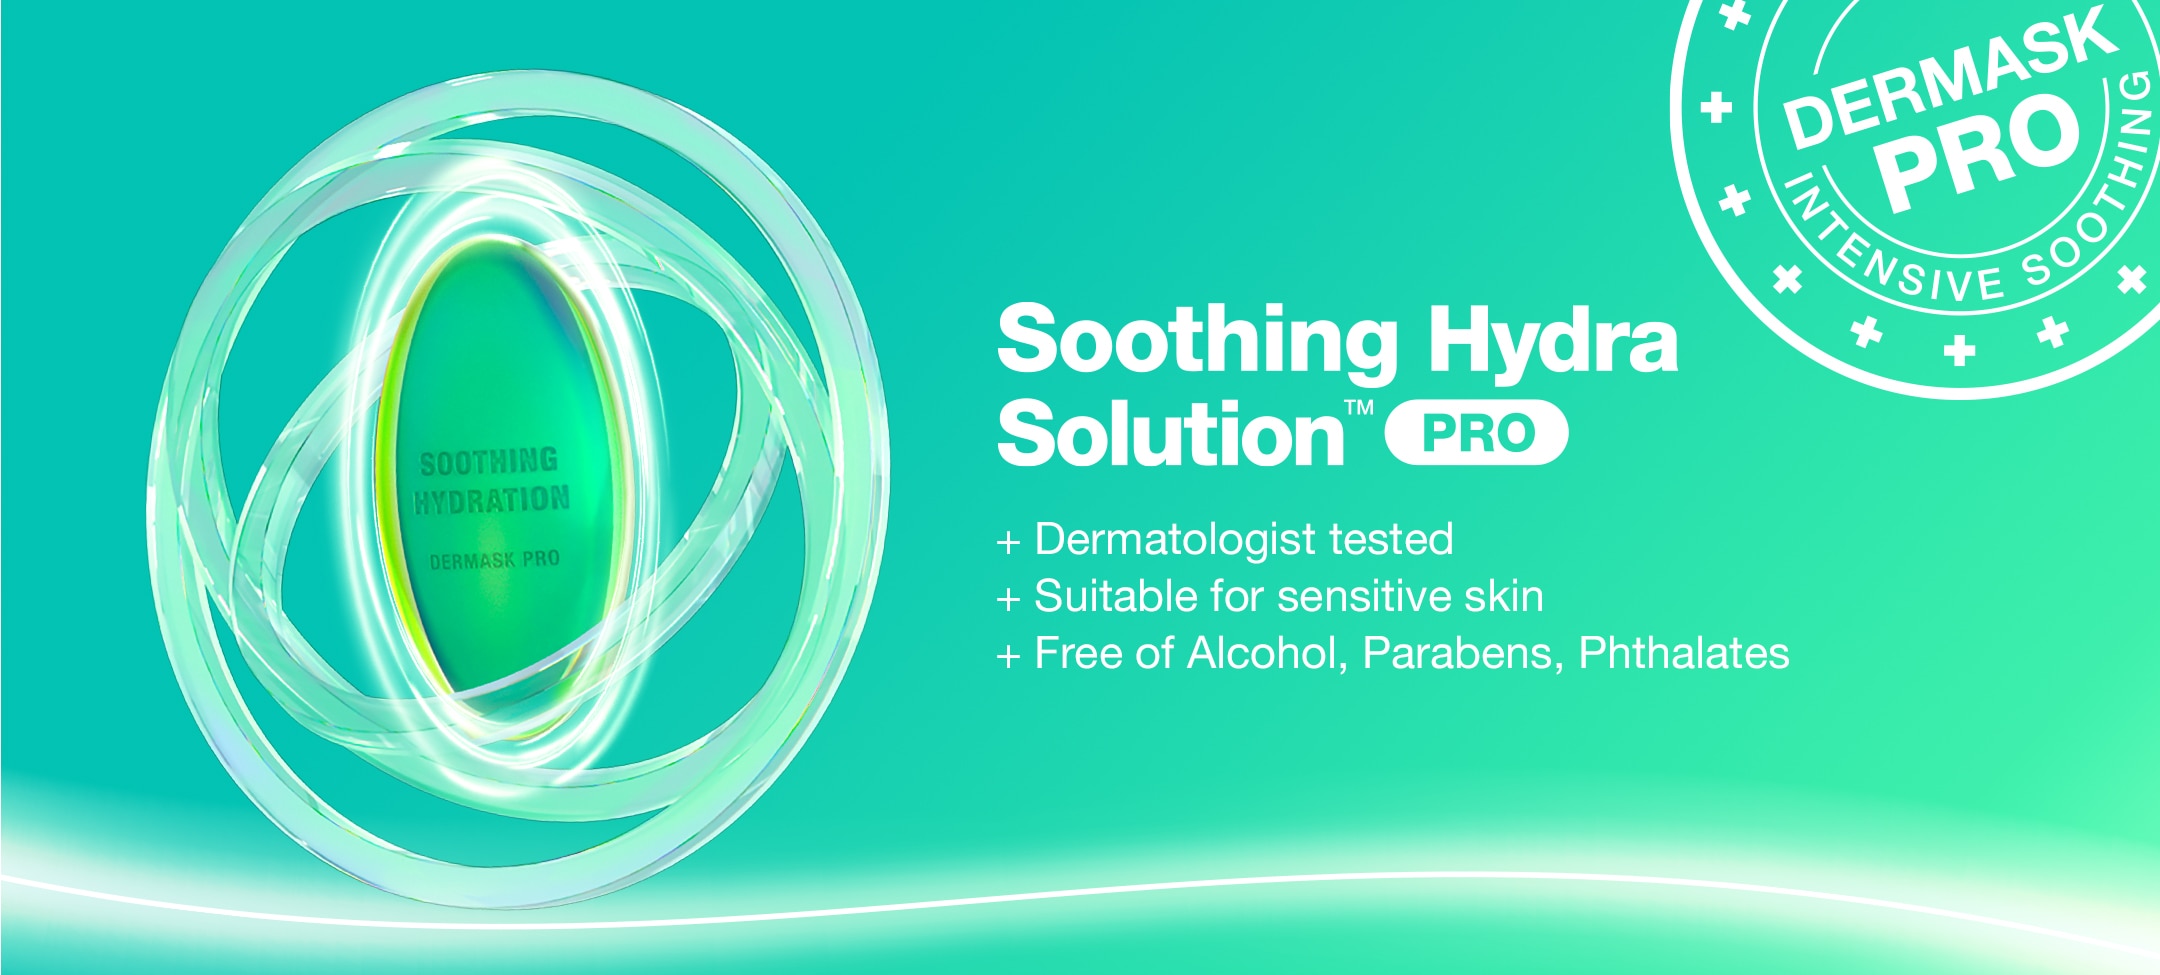 Soothing Hydra Solution Pro is dermatologist tested, safe for sensitive skin and free from drying alcohol